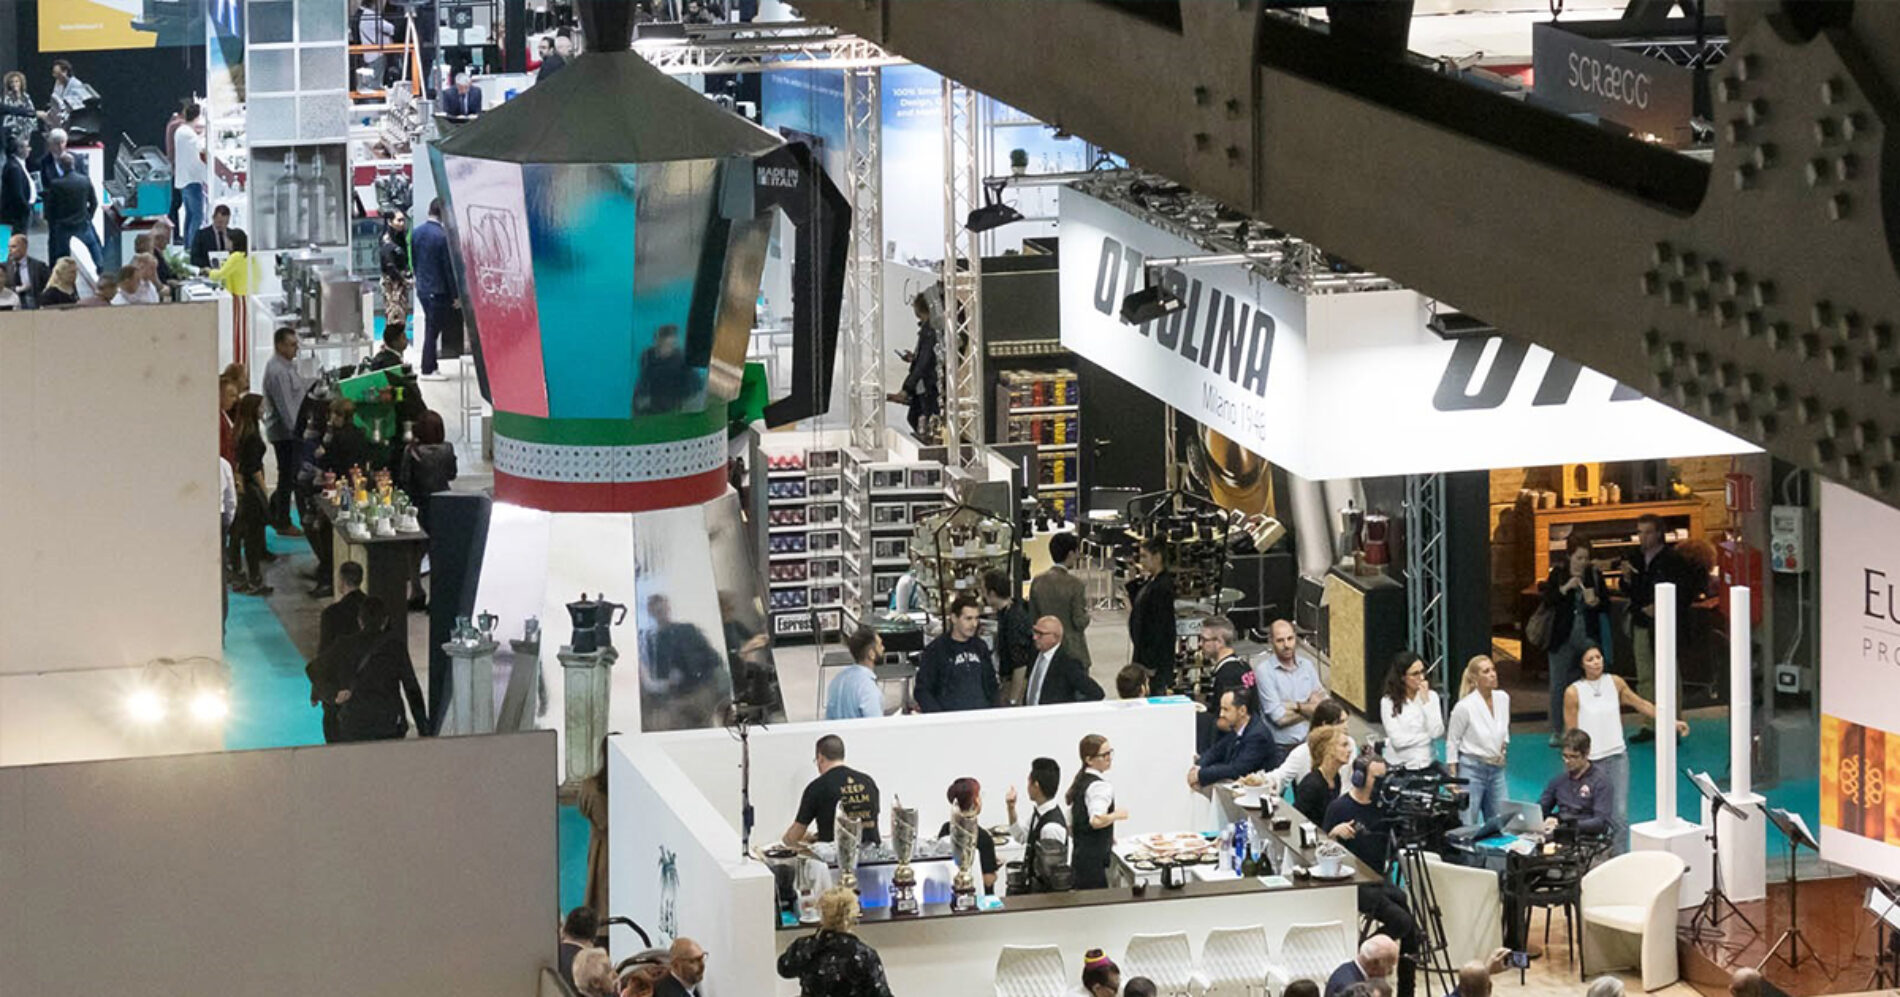 HostMilano 2019 sees record-breaking edition with 200,000 visitors